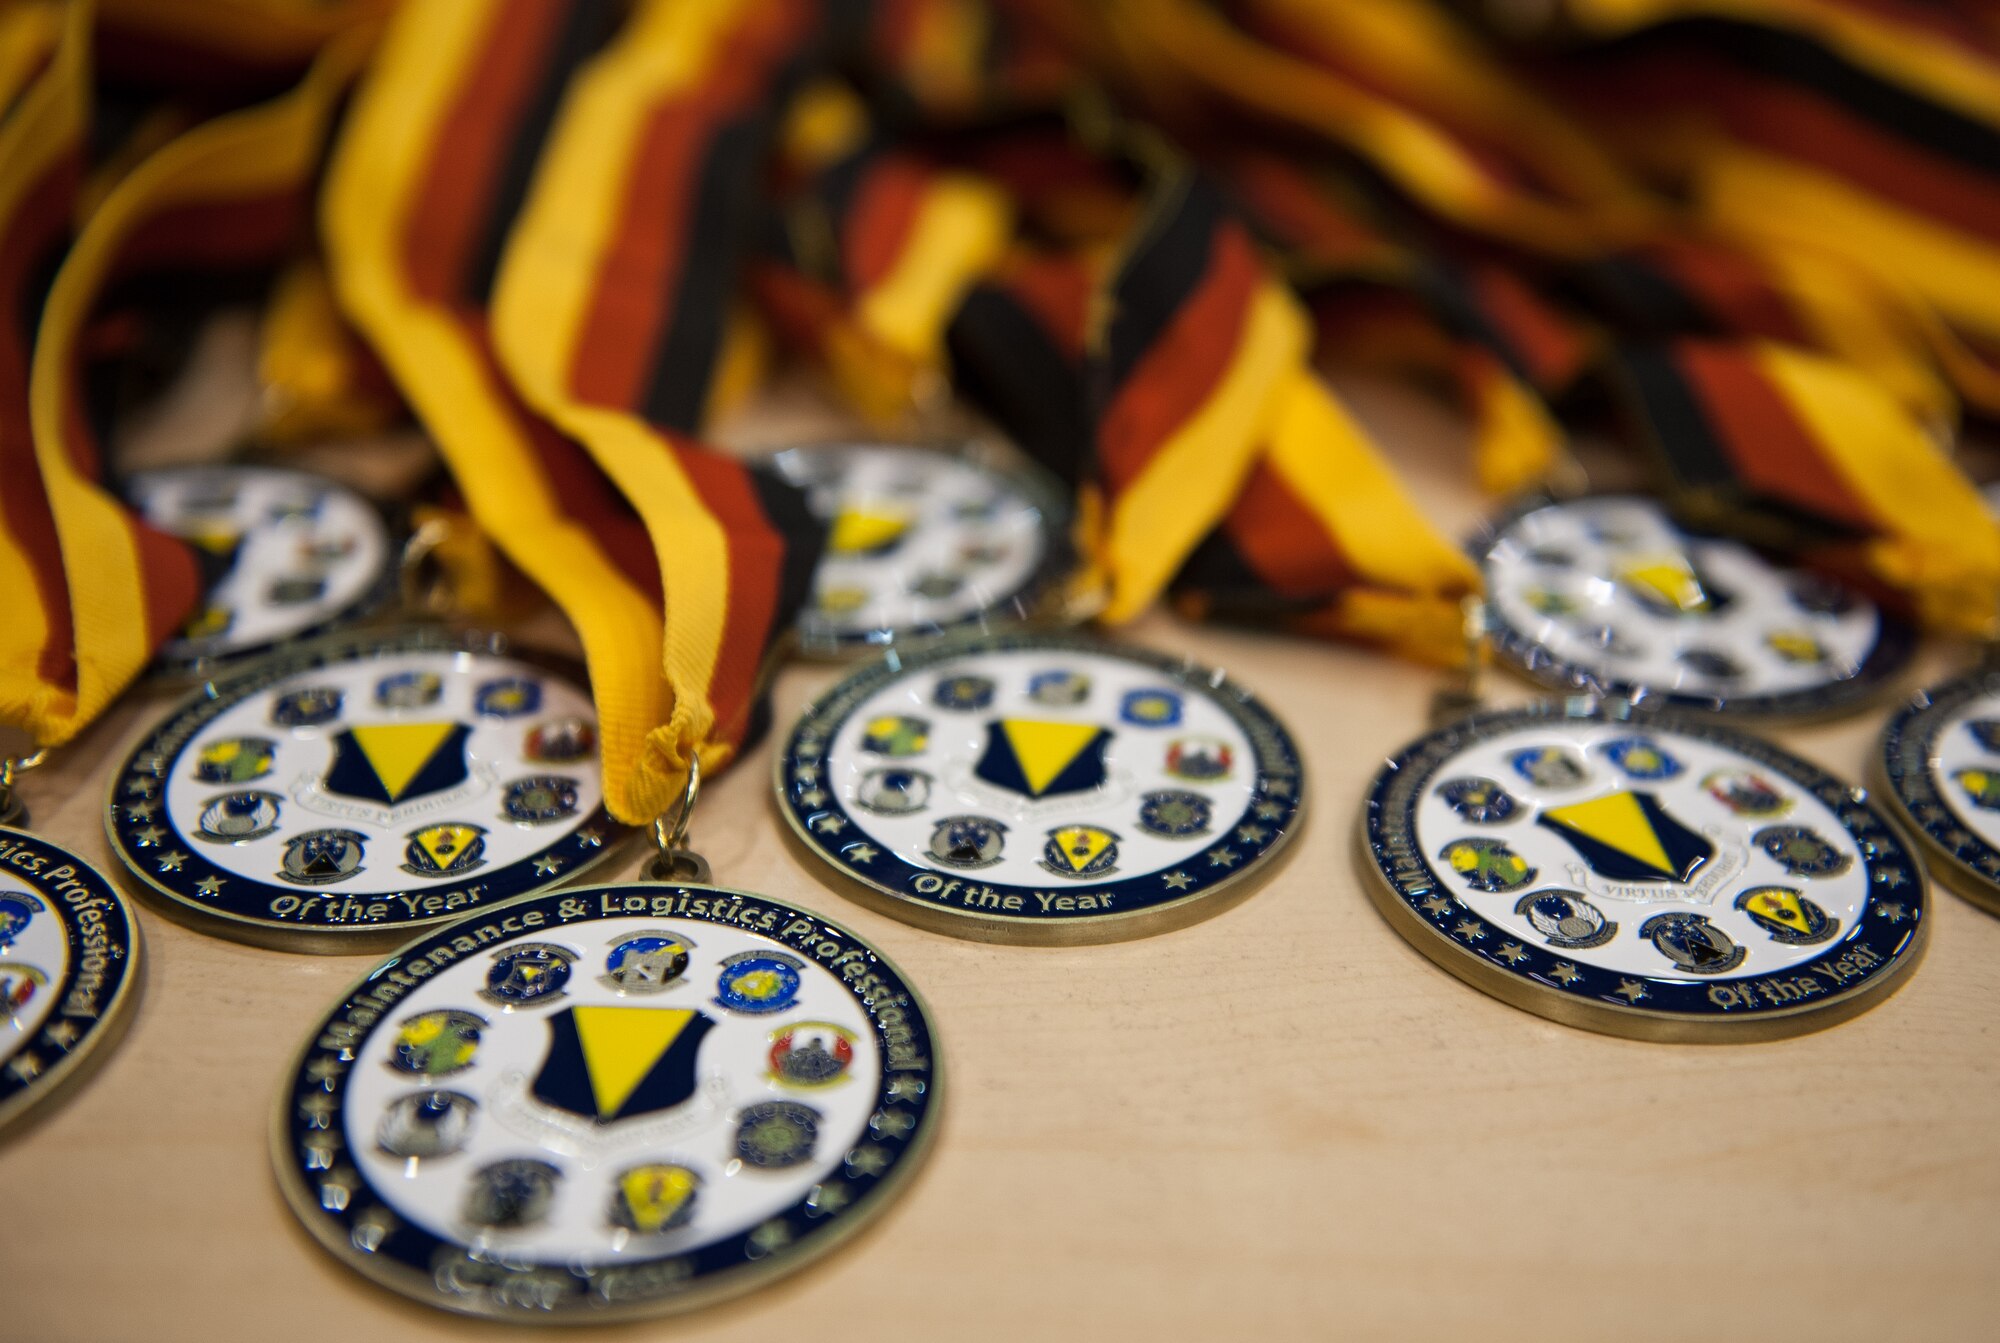 Medallions are arranged on a table at the 2016 Maintenance and Logistics Airmen Annual Award ceremony on Ramstein Air Base, Germany, Feb. 17, 2017. Airmen from the maintenance and logistics career fields were brought together to send off 2016 with an annual award ceremony that recognized the very best amongst them. (U.S. Air Force photo by Senior Airman Lane T. Plummer)